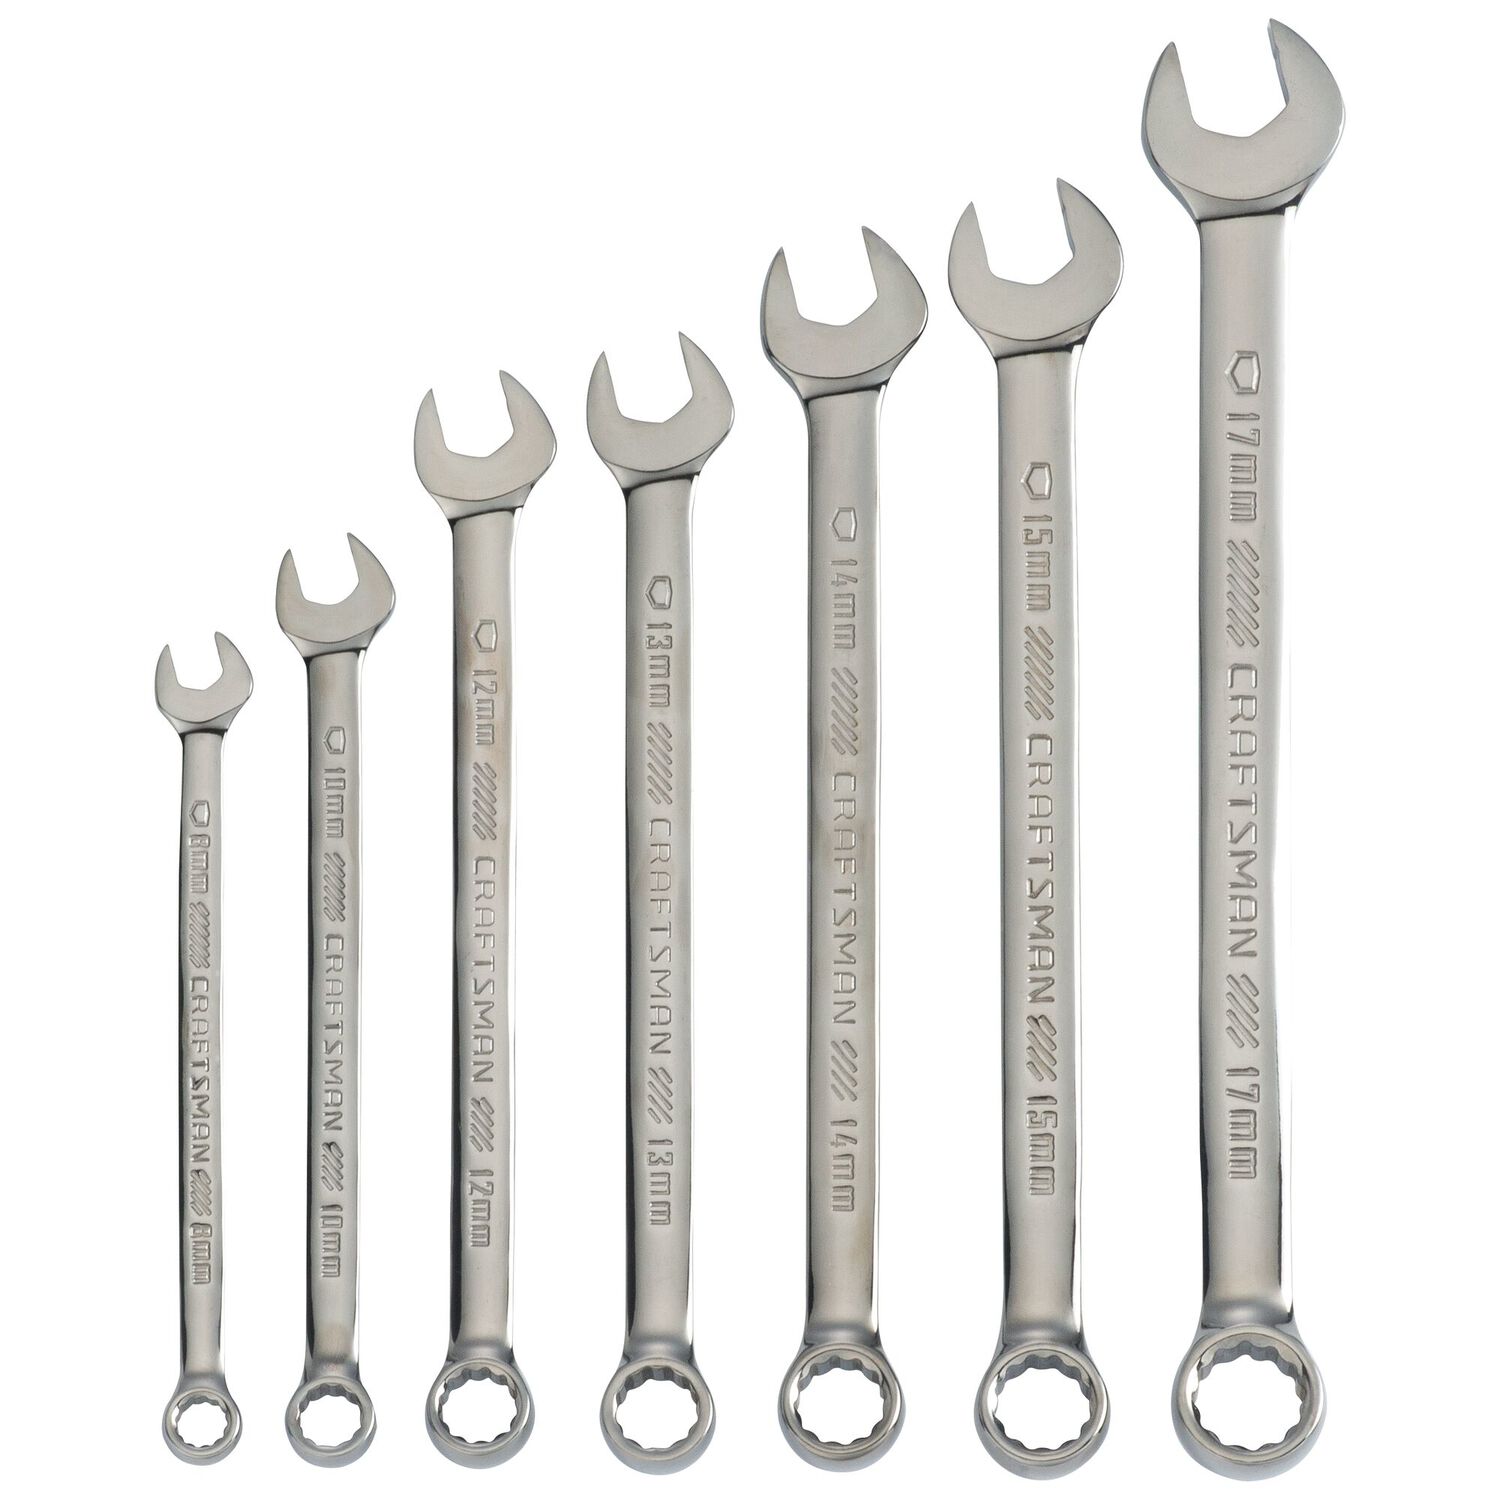 Wrenches | Stine Home + Yard : The Family You Can Build Around™